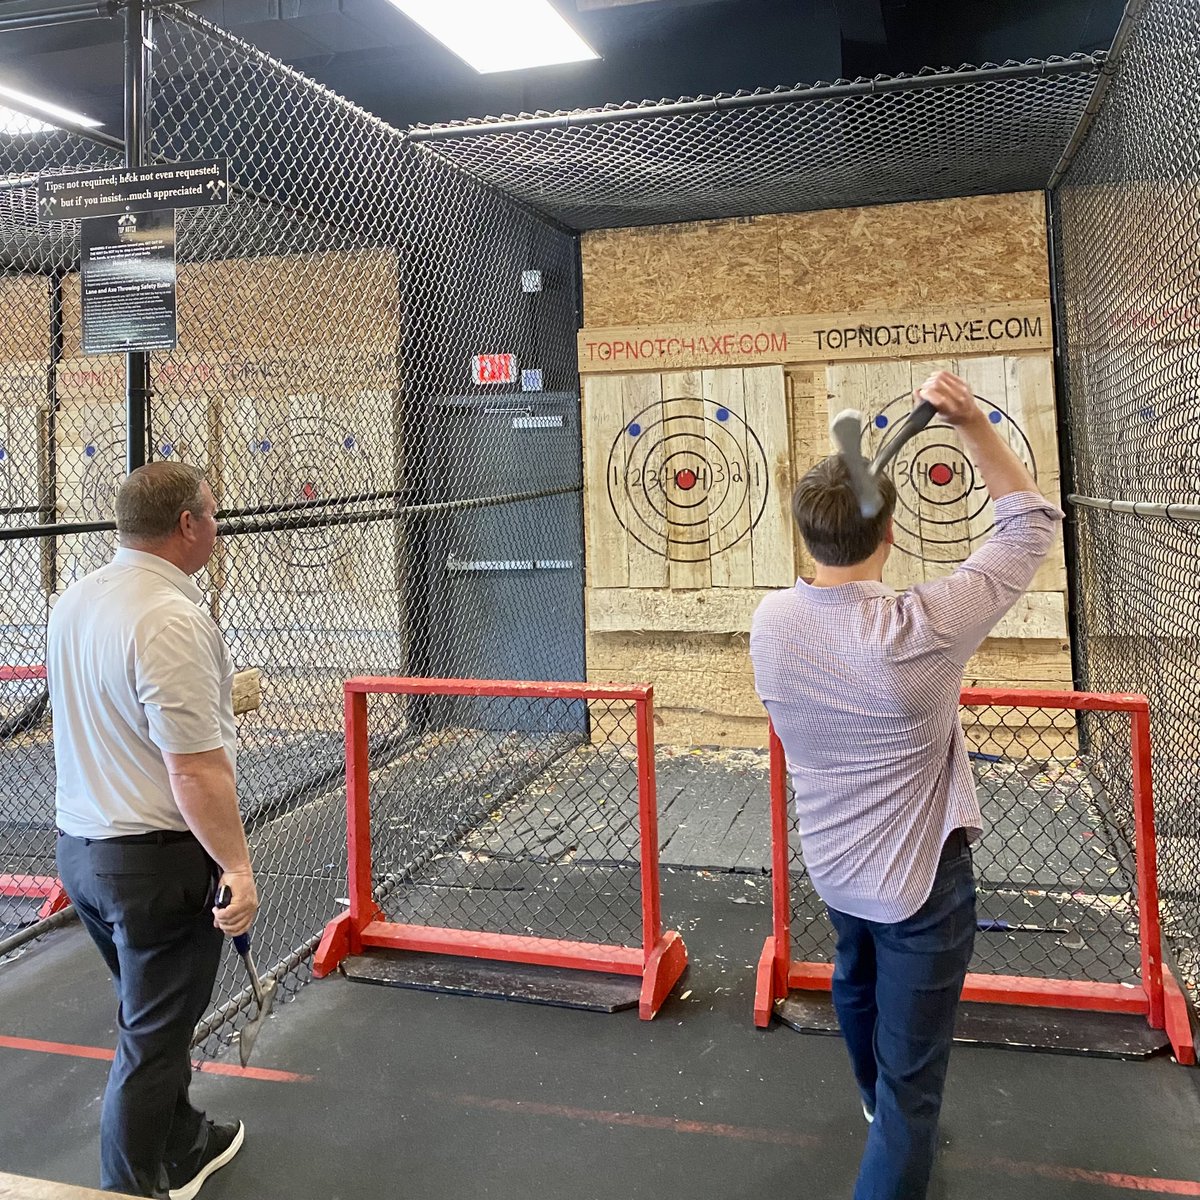 Our Regional Managers gathered for some team building and axe throwing fun at Top Notch Axe Throwing in St. Louis! #RottlerPestSolutions